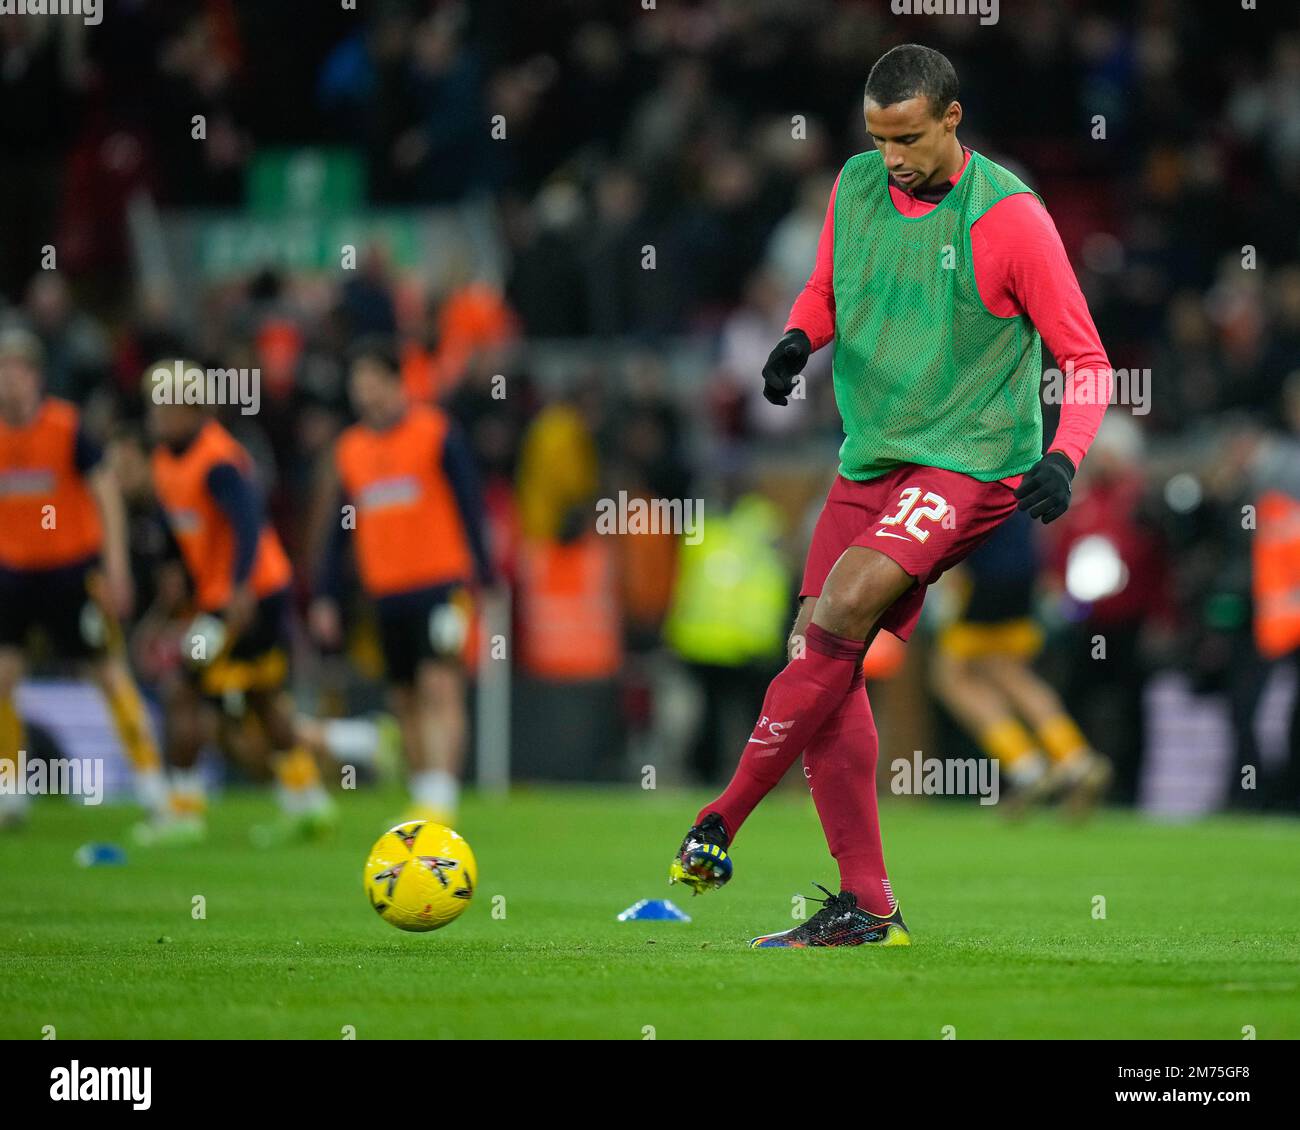 Joel Matip #32 of Liverpool warms up before the Emirates FA Cup Third Round match Liverpool vs Wolverhampton Wanderers at Anfield, Liverpool, United Kingdom, 7th January 2023  (Photo by Steve Flynn/News Images) Stock Photo